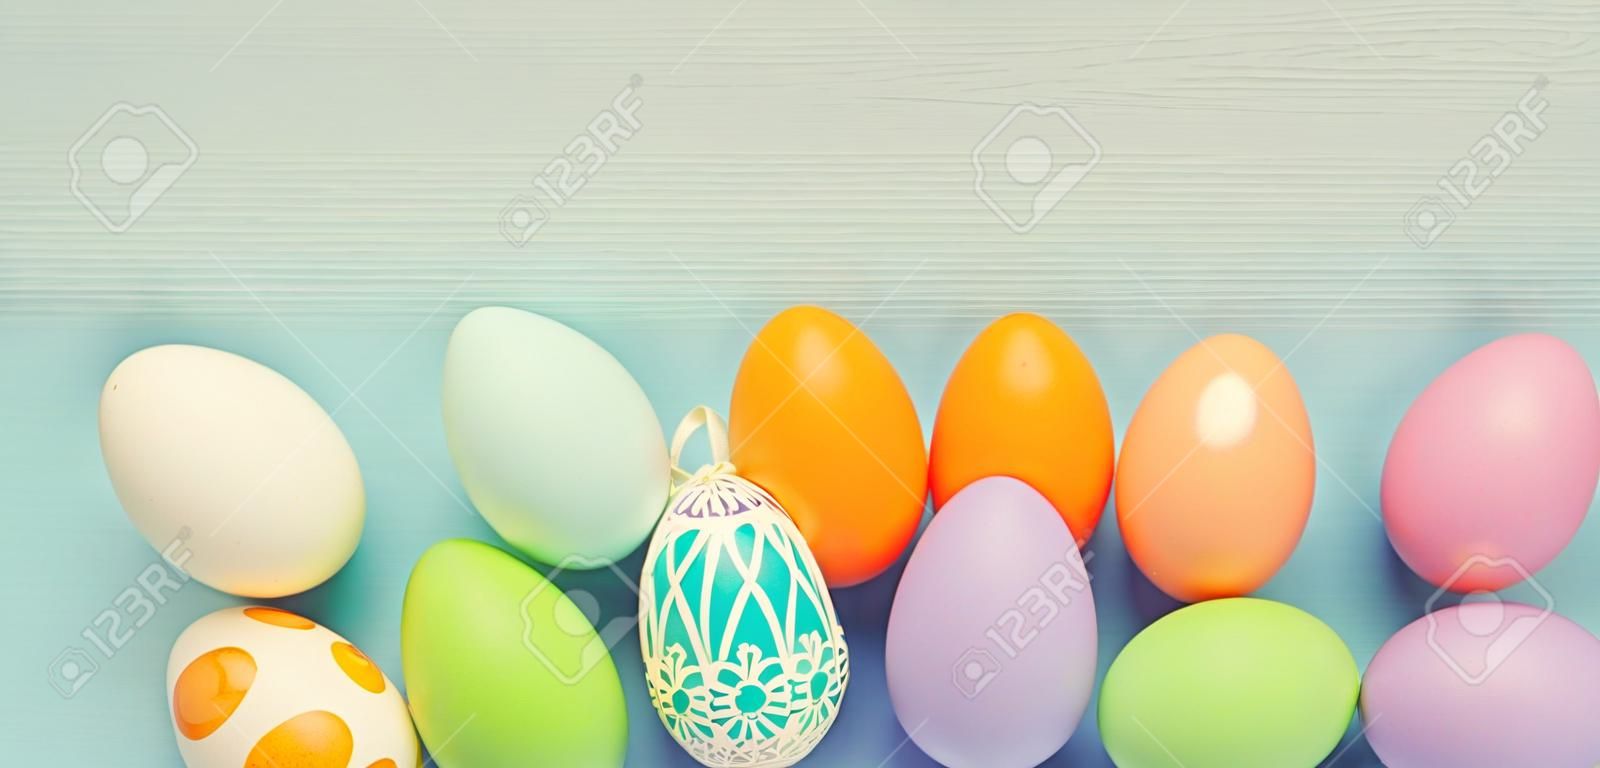 Top view of easter colorful eggs over blue background